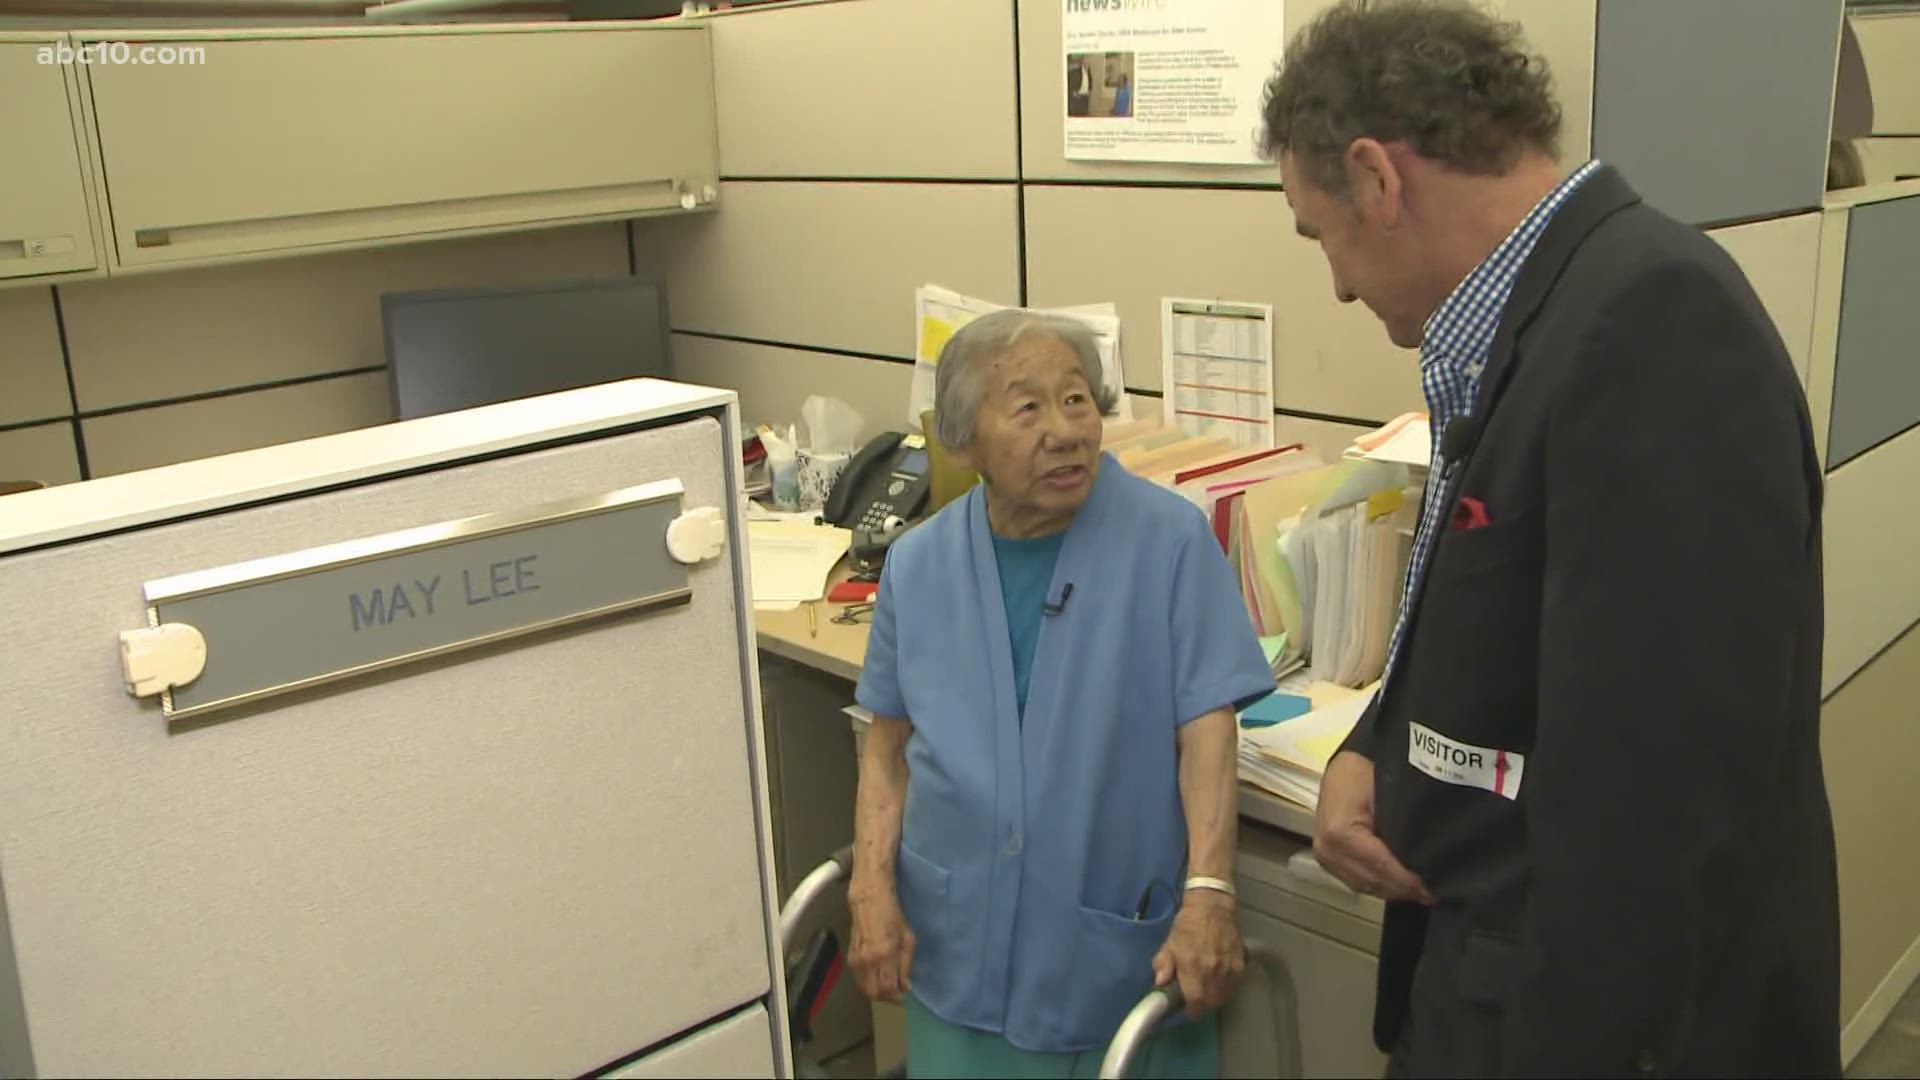 May Lee, California's oldest state worker, celebrates her 100th birthday